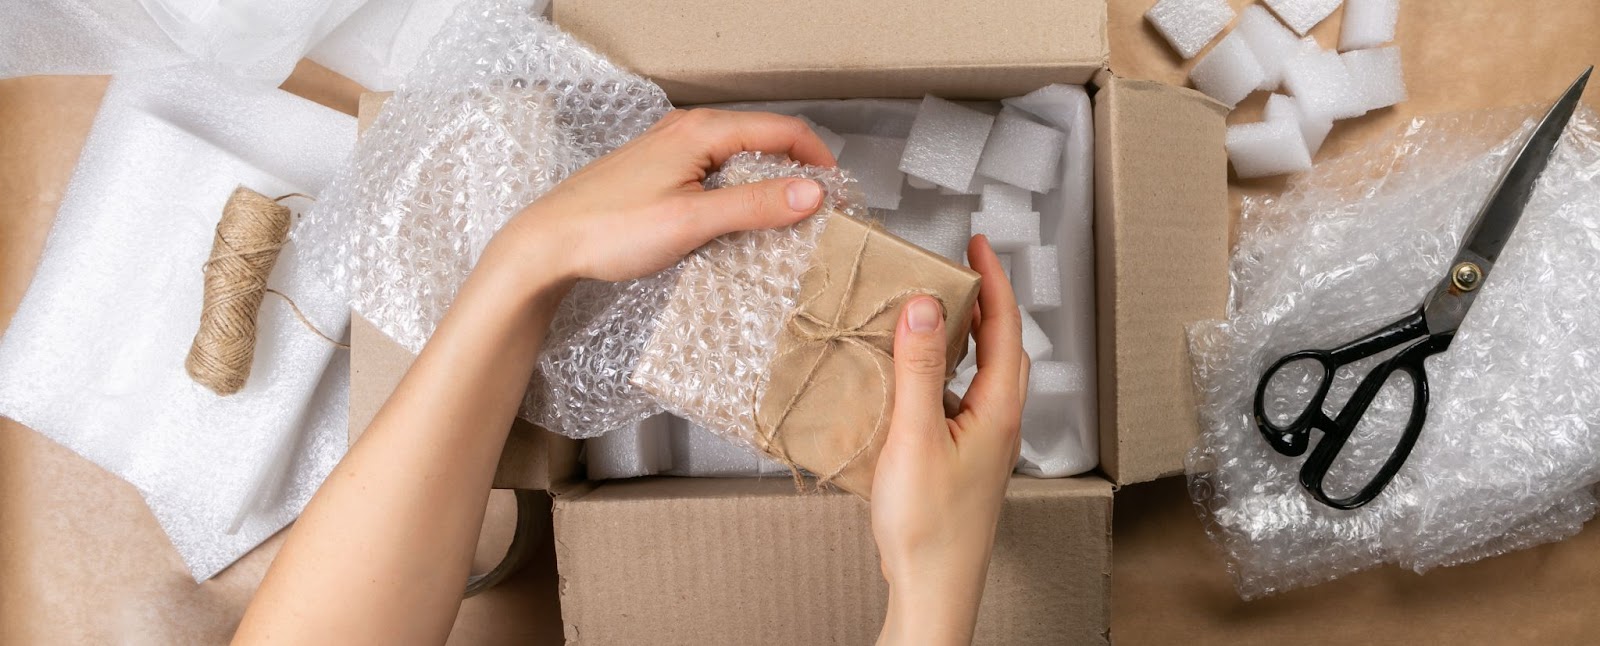 packaging trends 2023 - bubble wrap around package